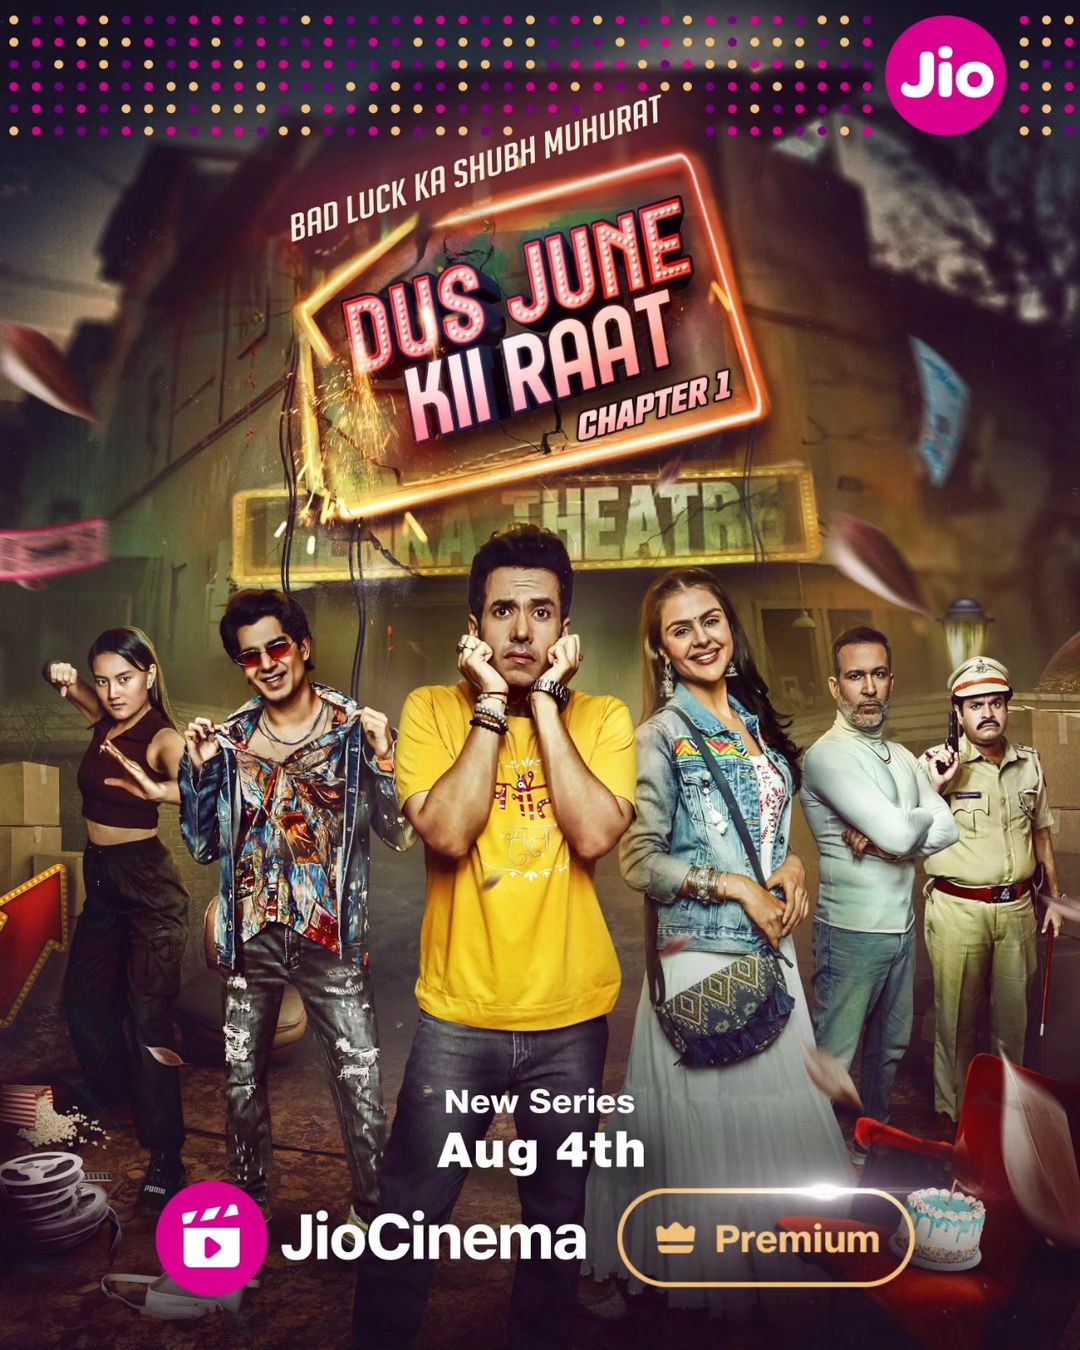 Finally, Dus June Kii Raat Makers Released The Trailer For This Upcoming Comedy Thriller Series. Let’s Come To Know The Review And When It Will Stream. 